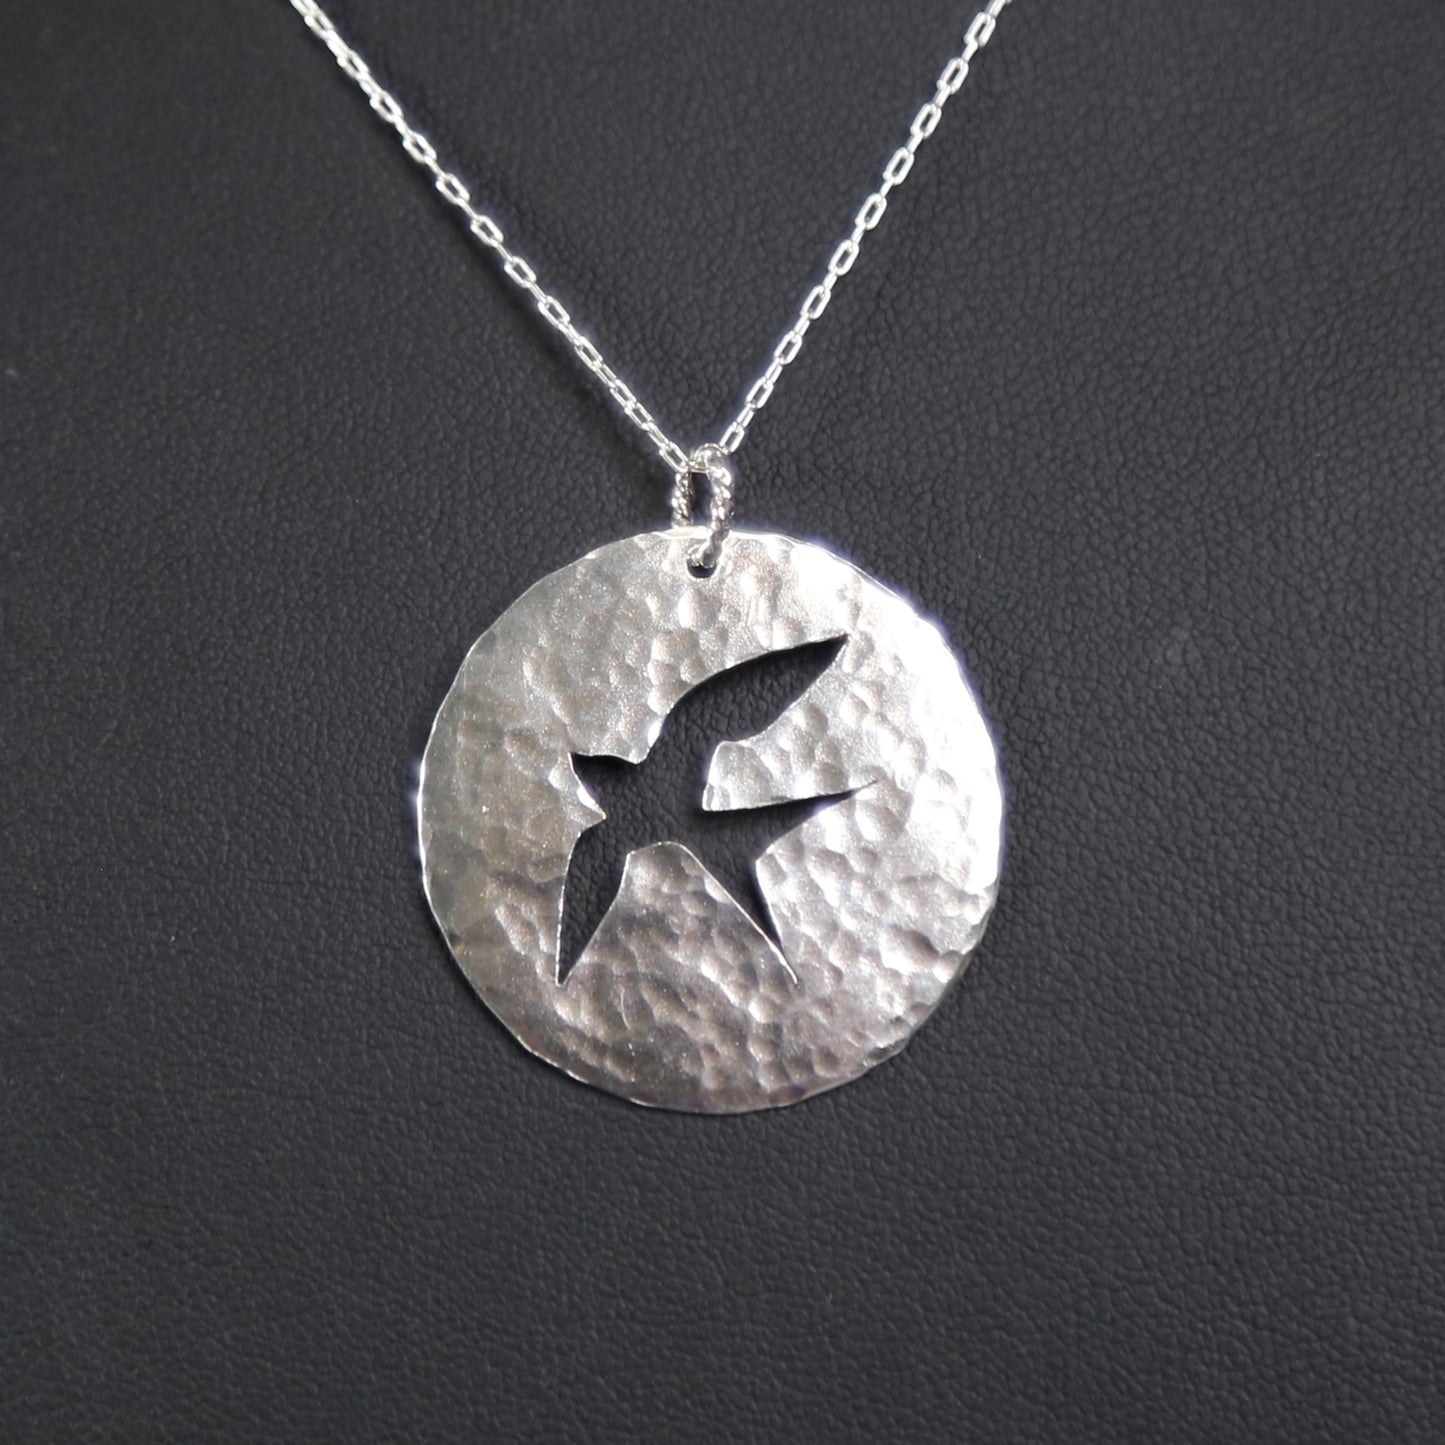 Bird in Flight - Hand-Cut and Hammered Circle Sterling Silver Pendant Necklace - Bird Silhouette 